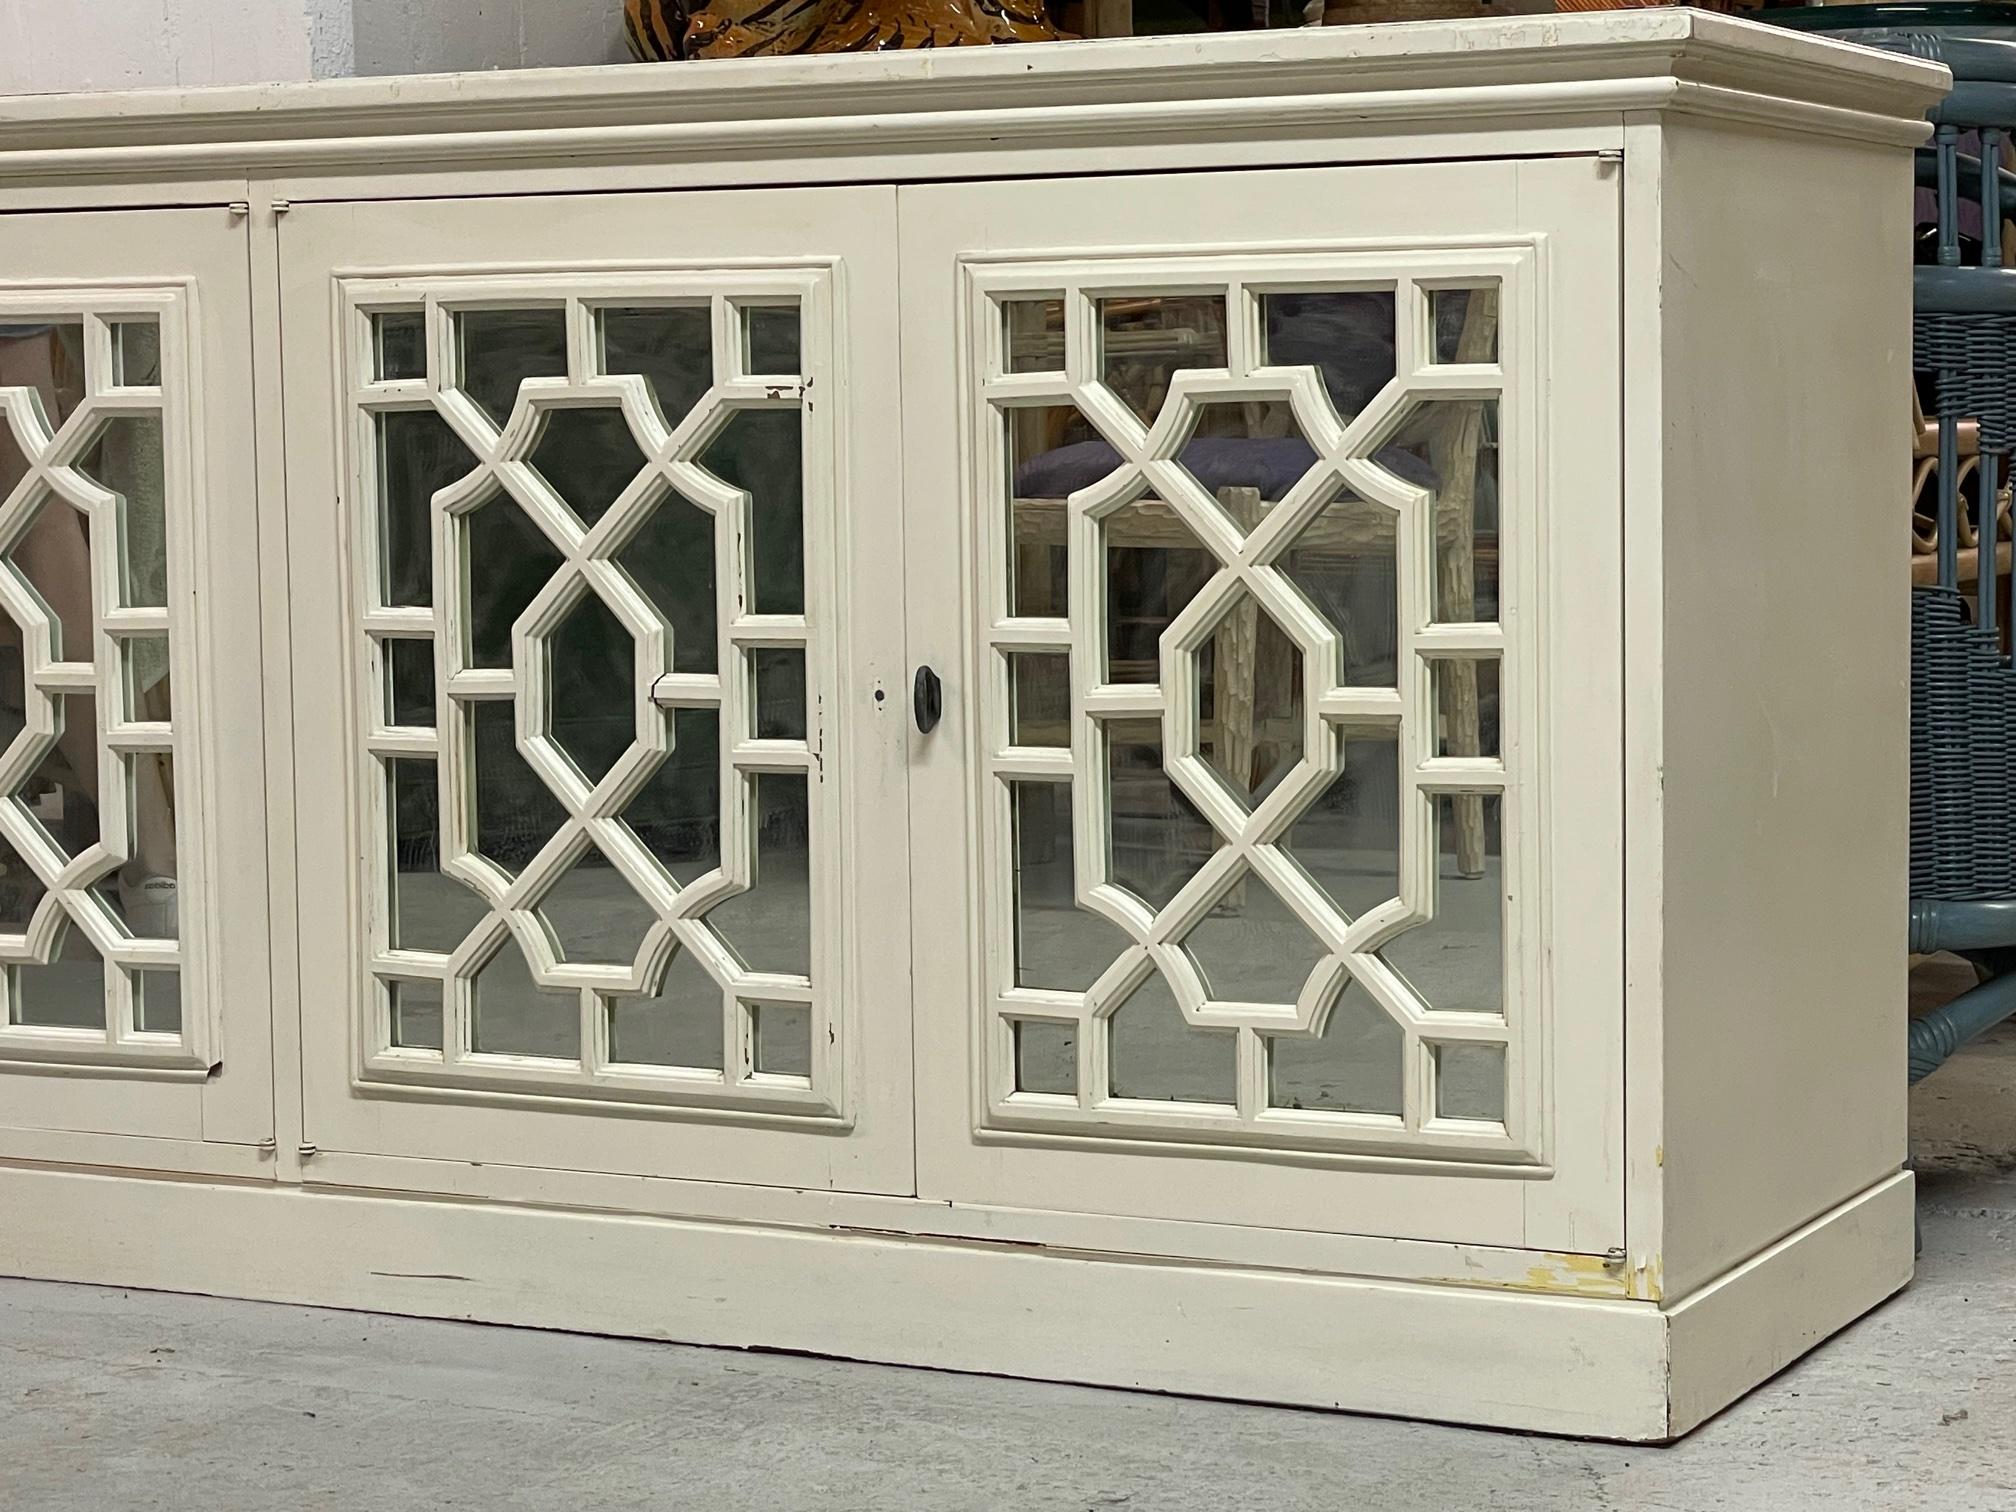 Large solid wood credenza features triple double door storage sections. Mirrored front doors overlaid in Asian style fretwork. Good vintage condition with scuffs to the original finish. Structurally sound and drawers doors operate smoothly. Missing